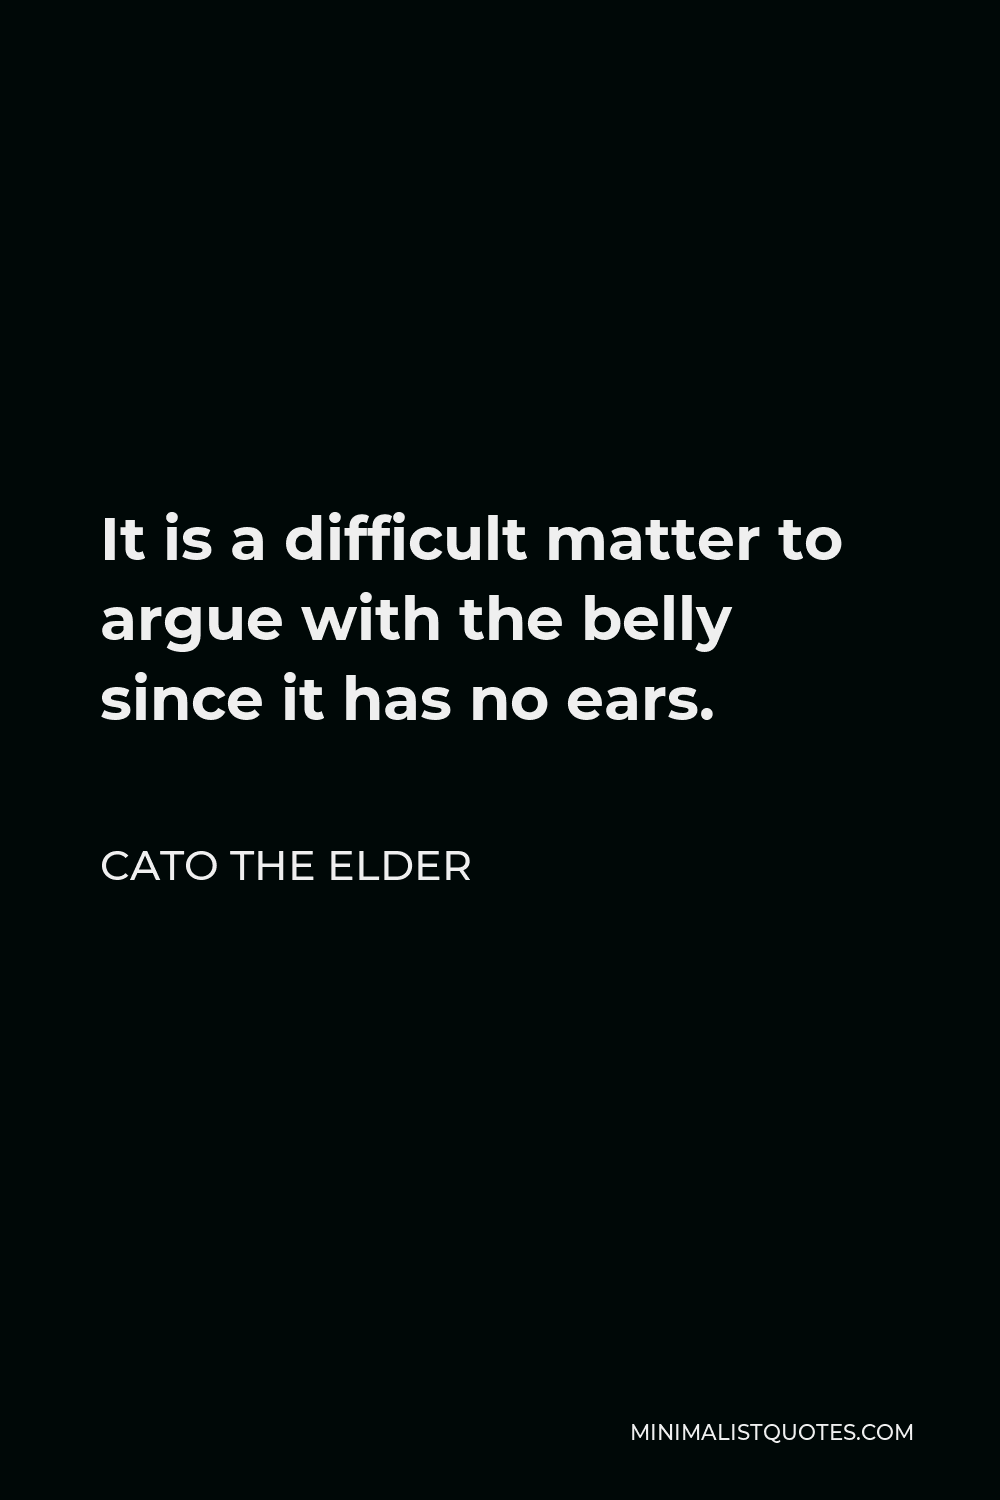 Cato the Elder Quote - It is a difficult matter to argue with the belly since it has no ears.